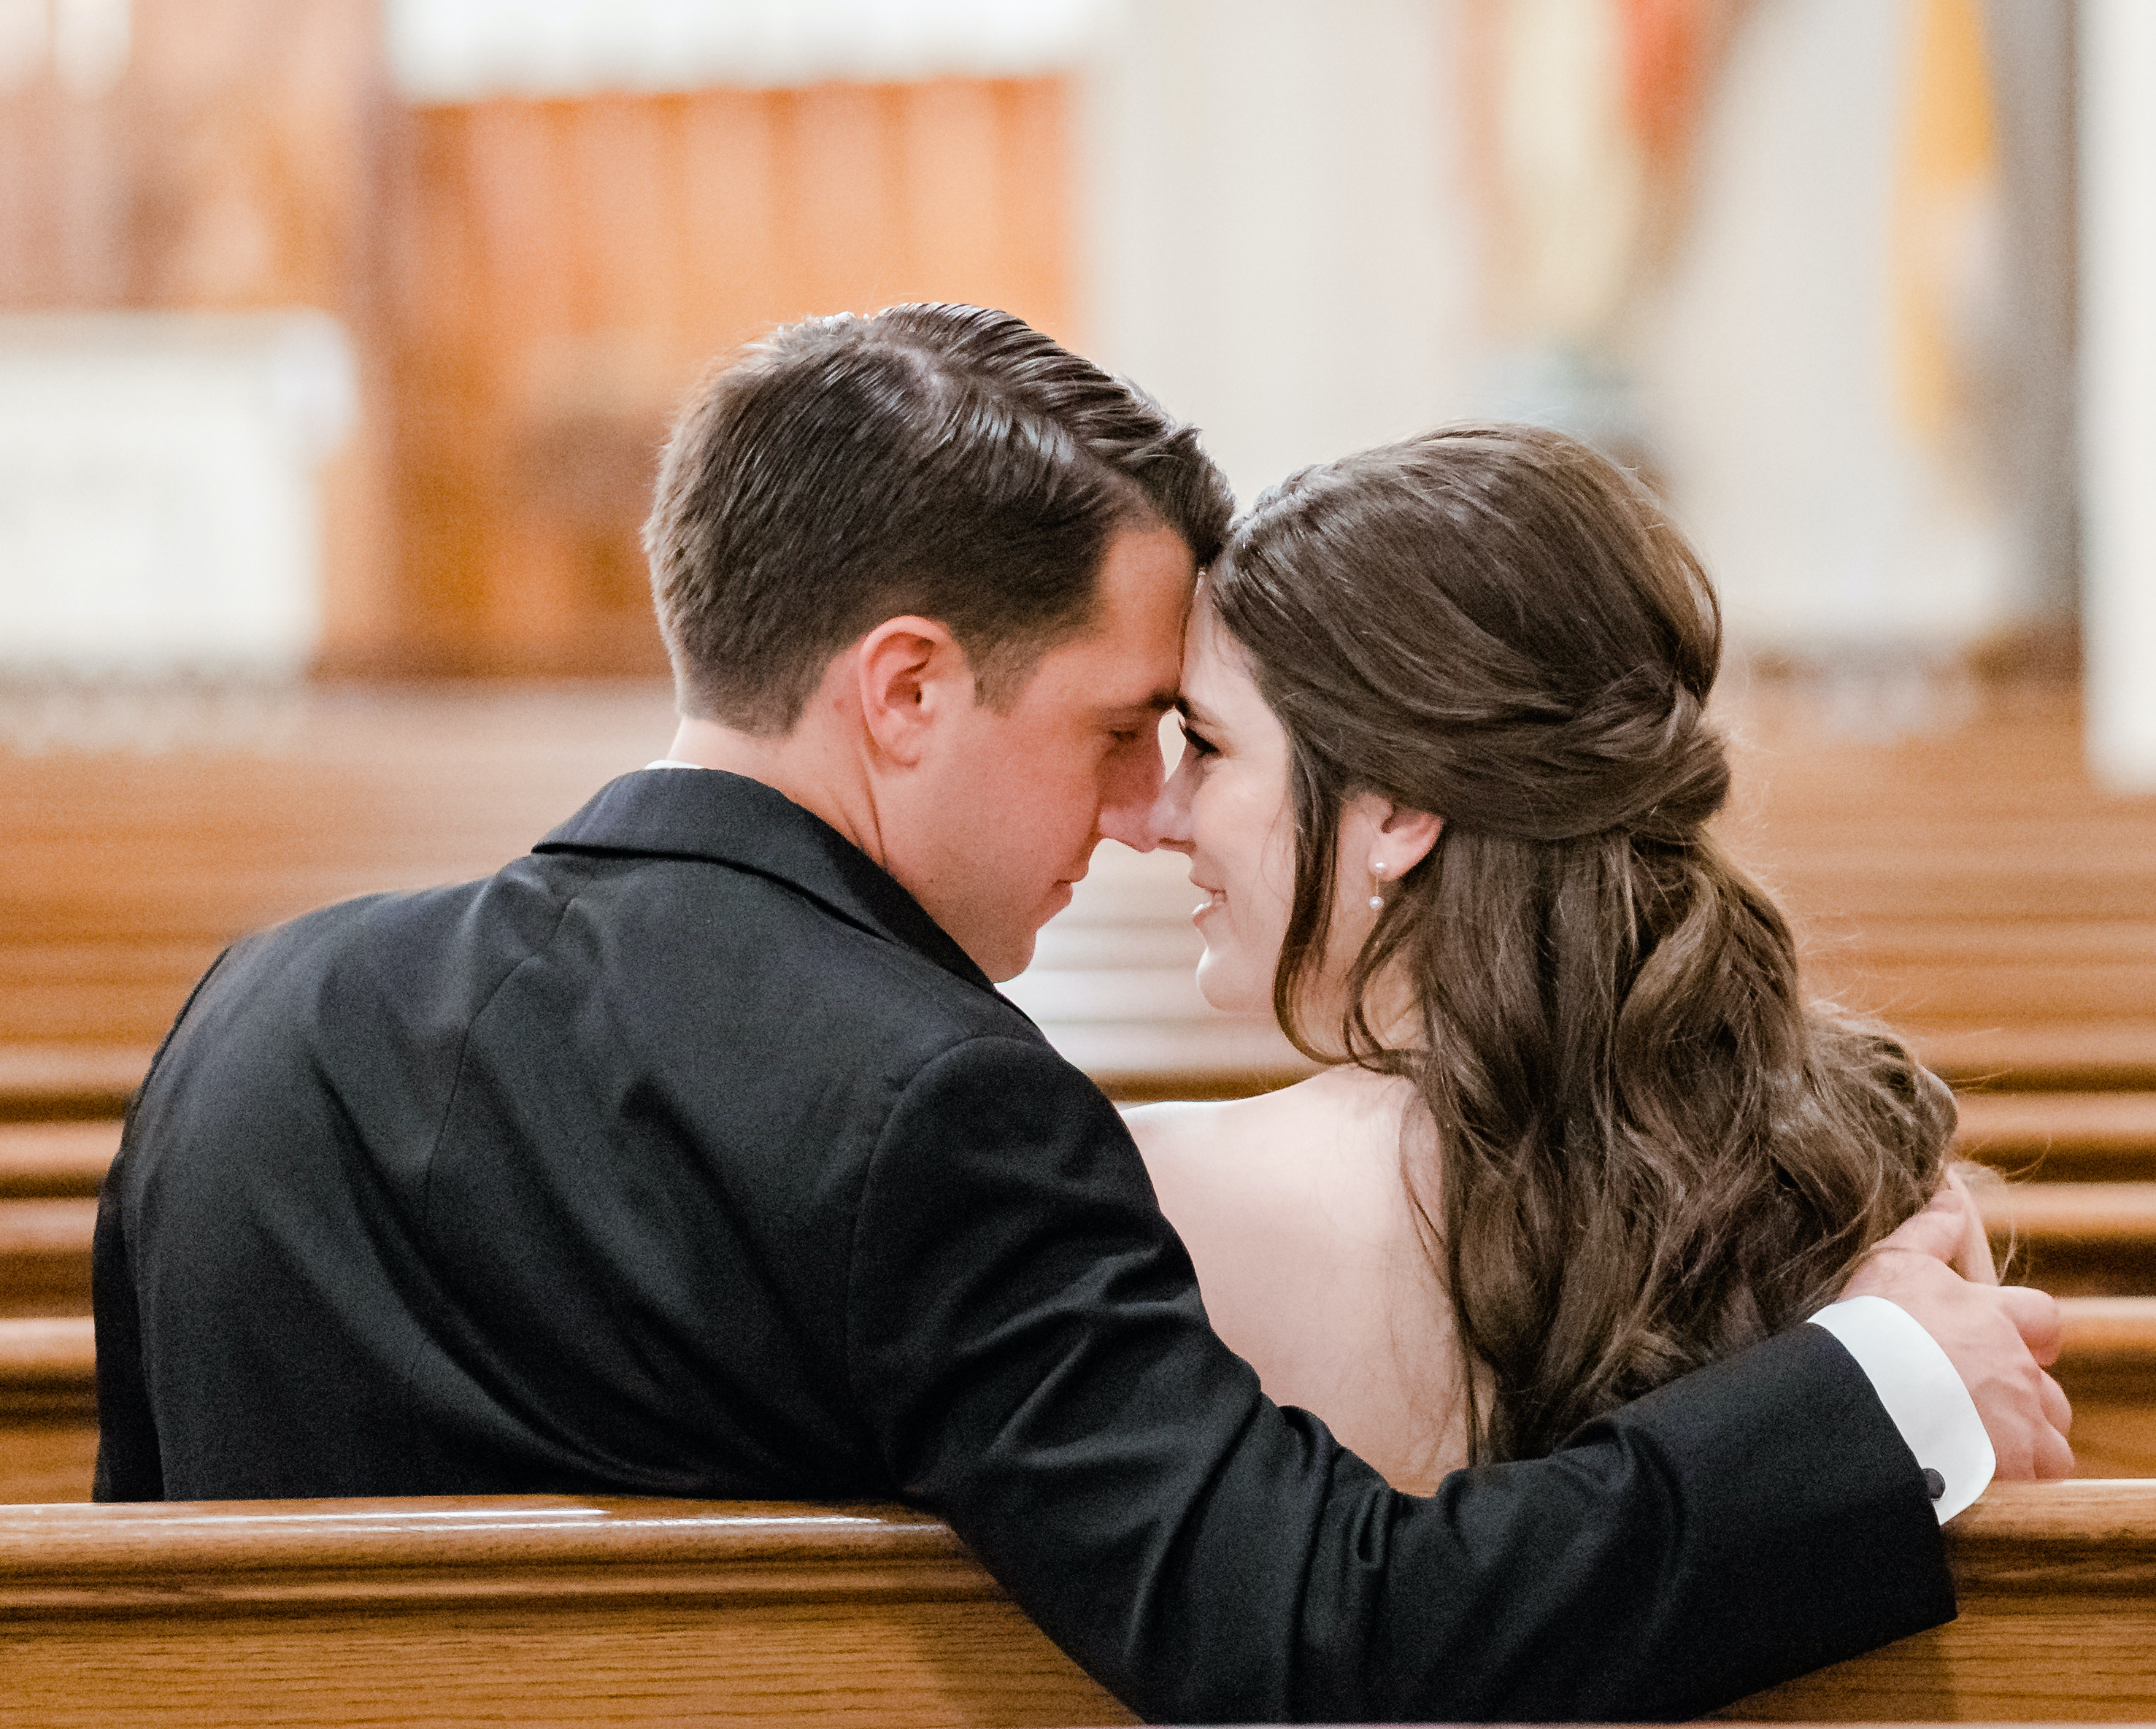 A groom puts his arm around his bride and they touch noses while sitting in a pew in the church.